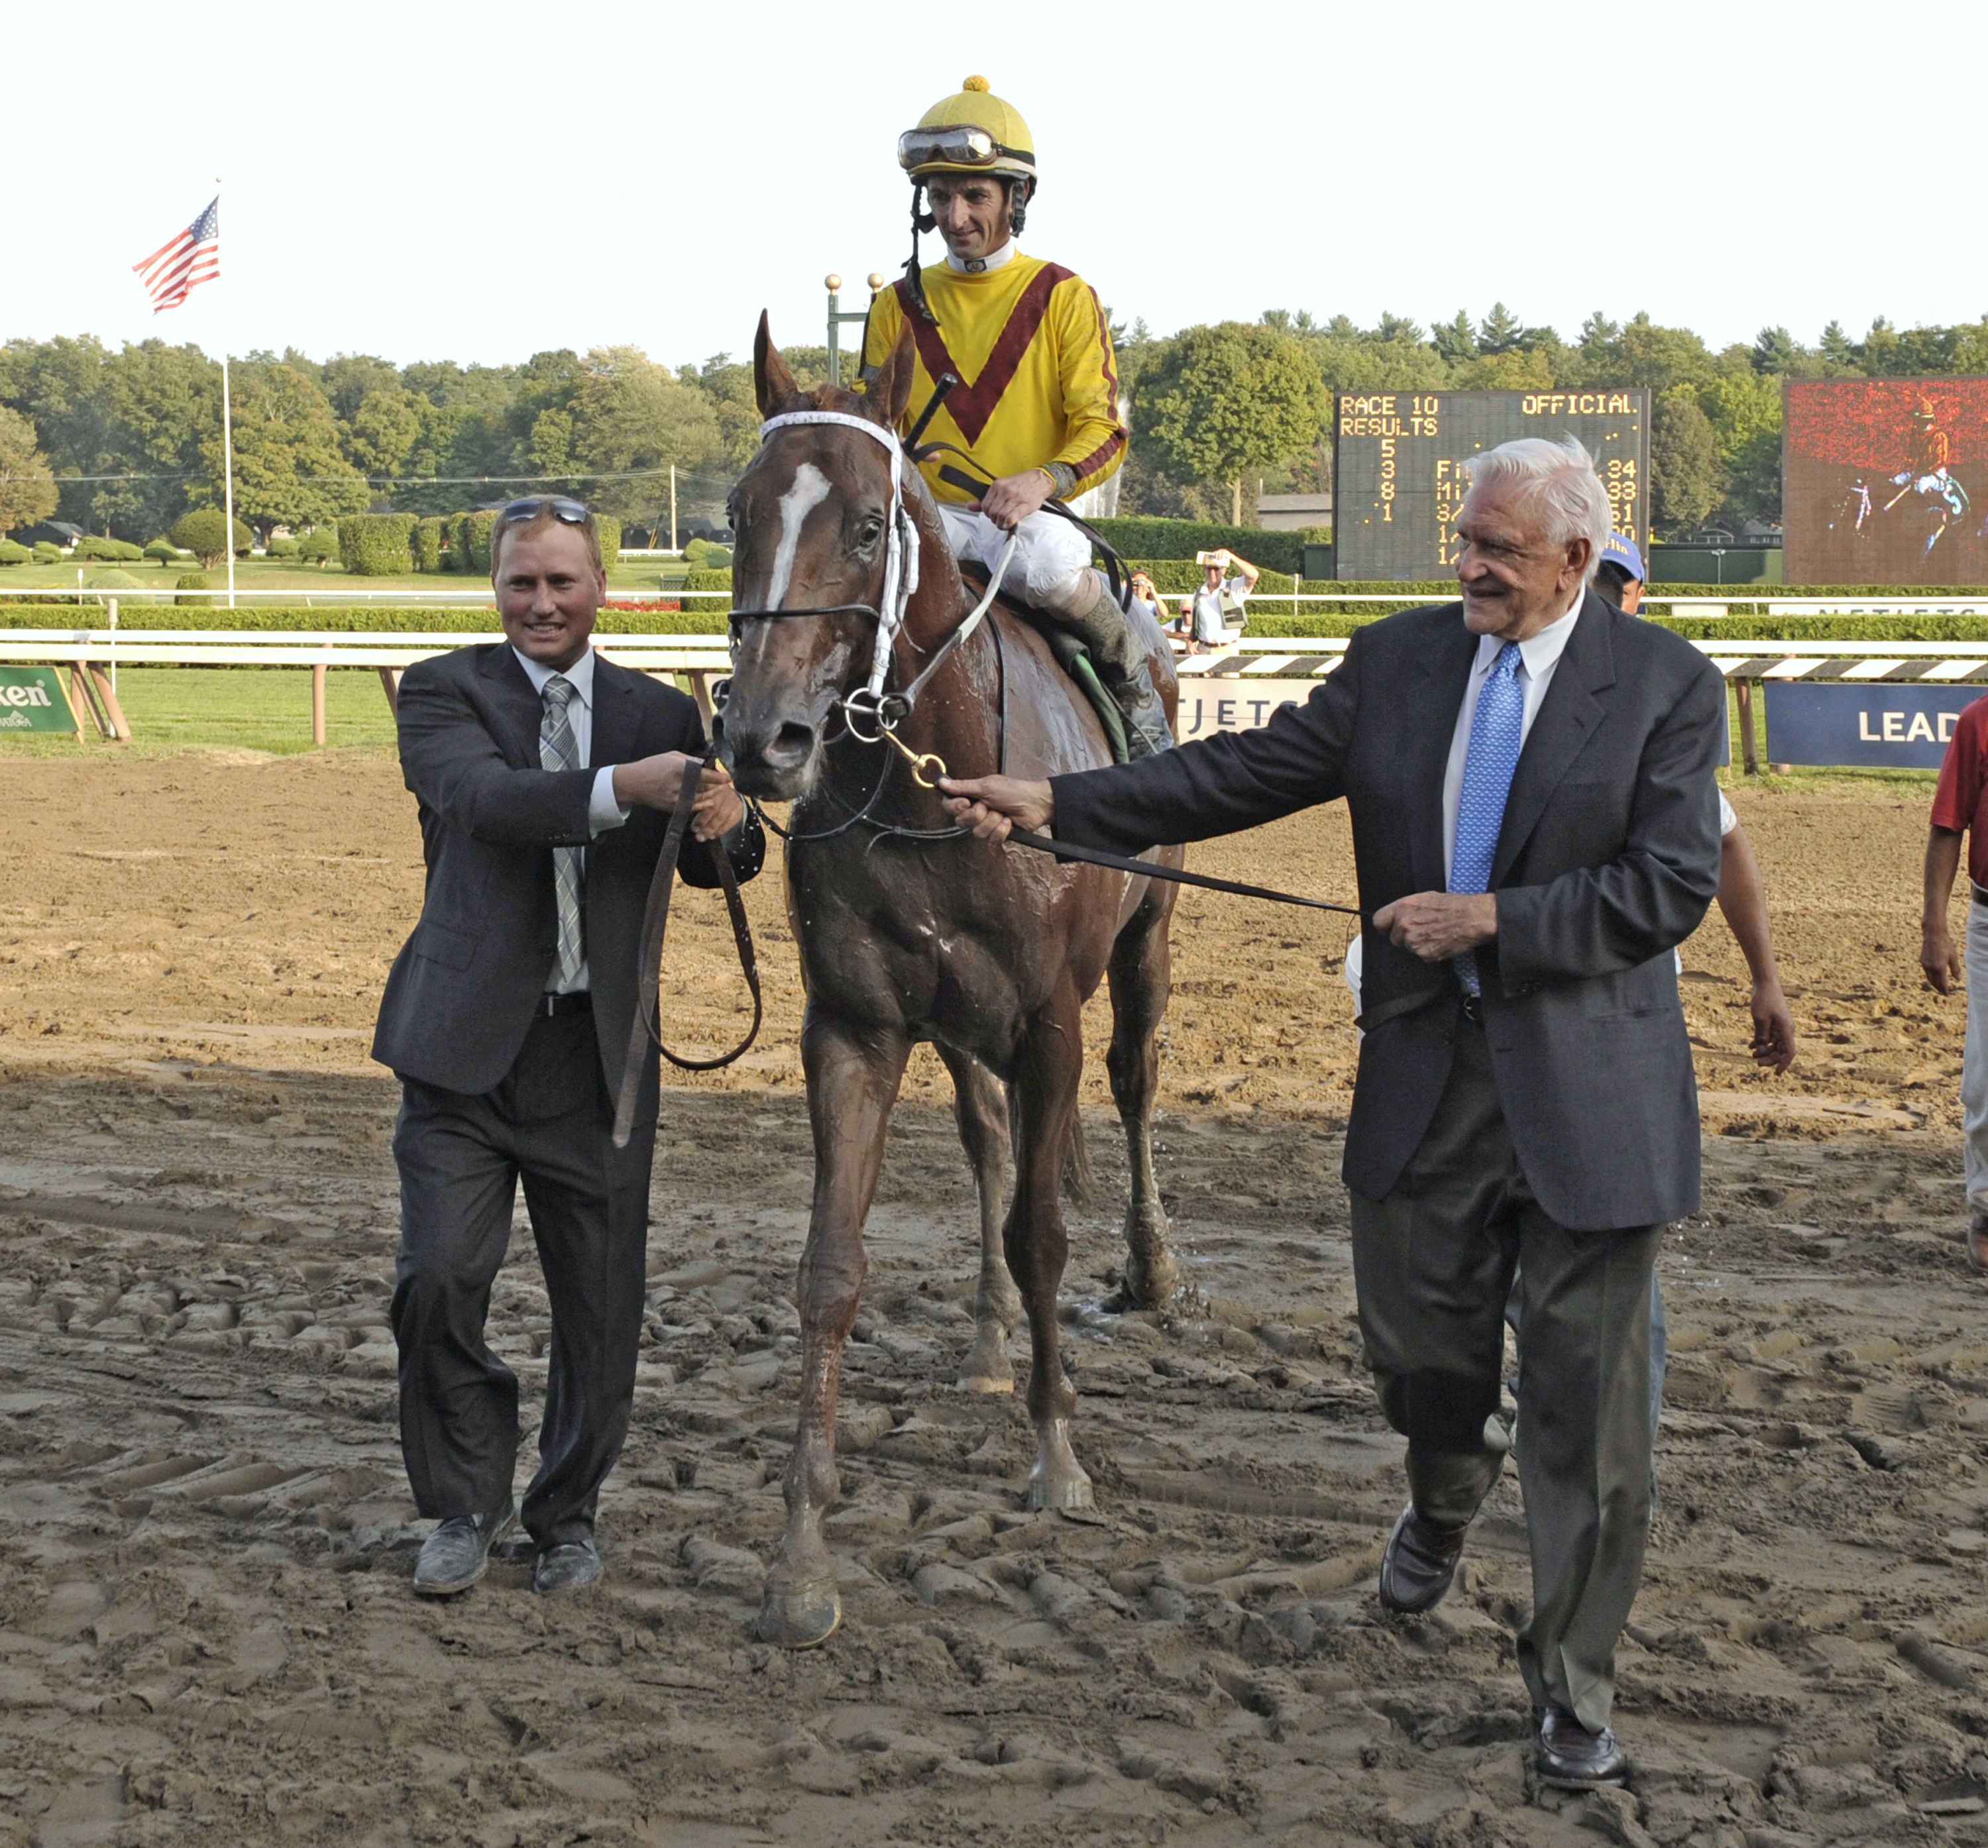 Curlin being led to the winner's circle after winning the 2008 Woodward at Saratoga Race Course (Skip Dickstein)